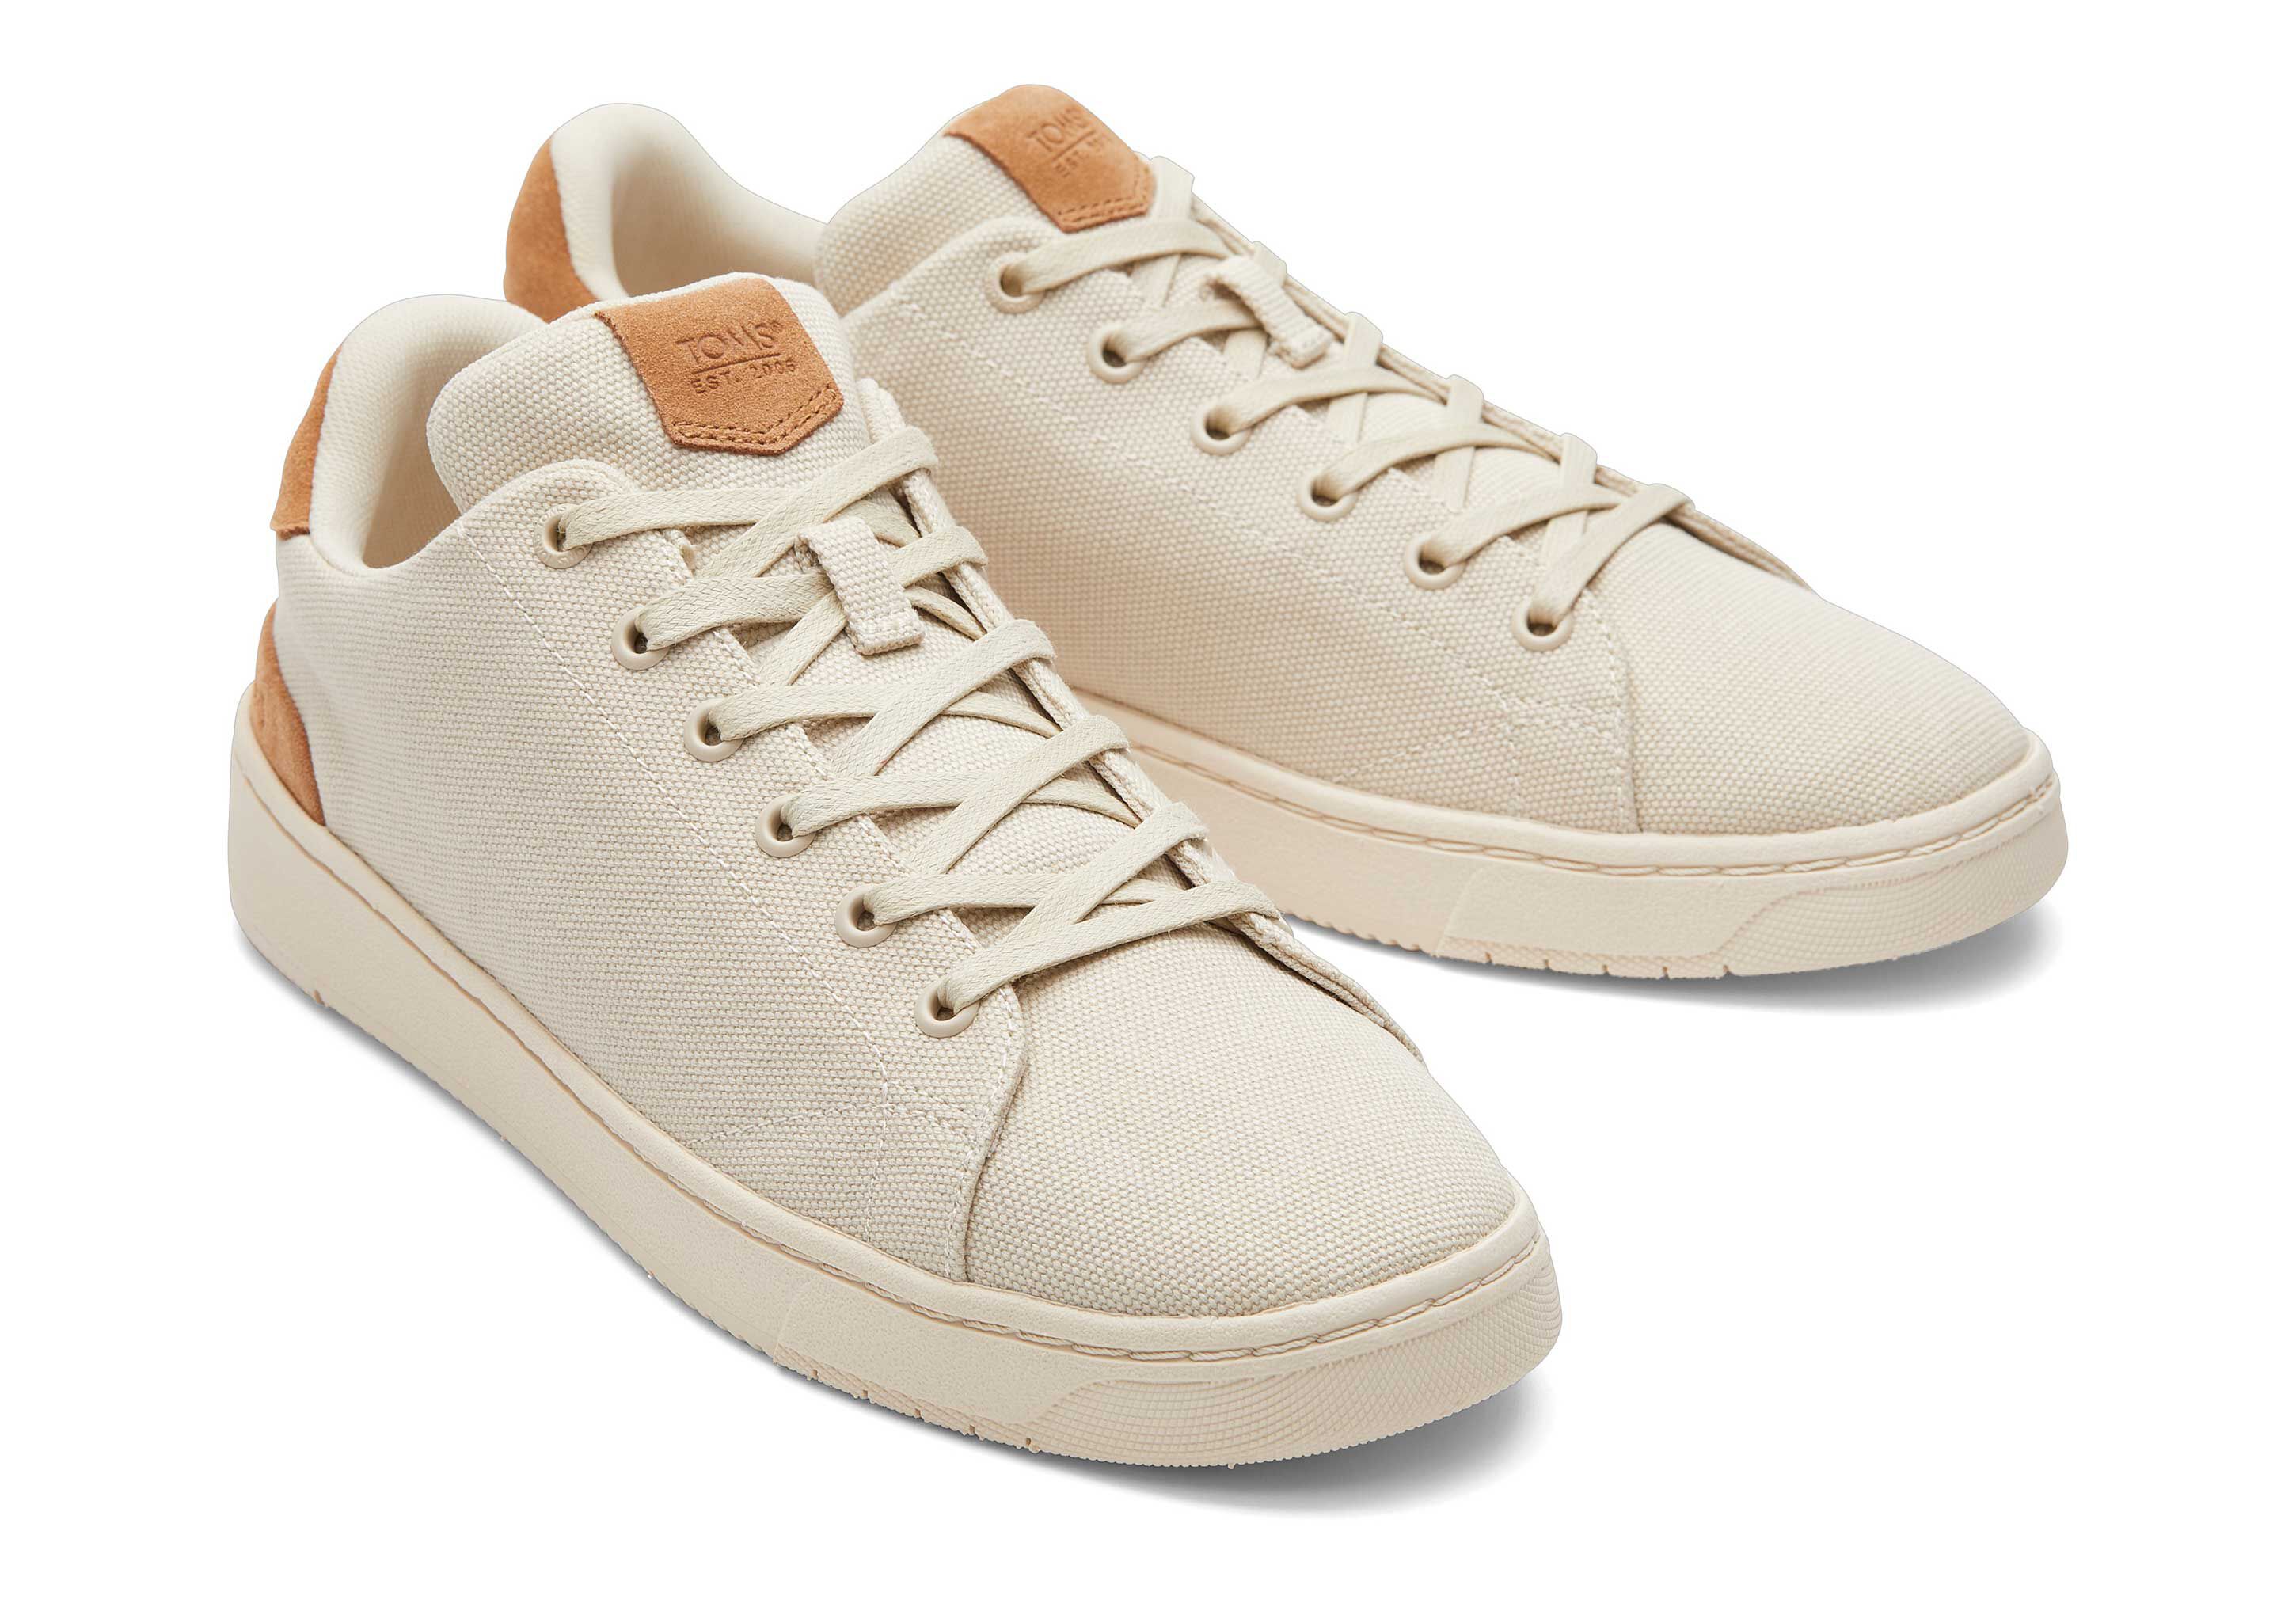 Buy Gola Contact Leather off white/khaki sneakers online from gola.